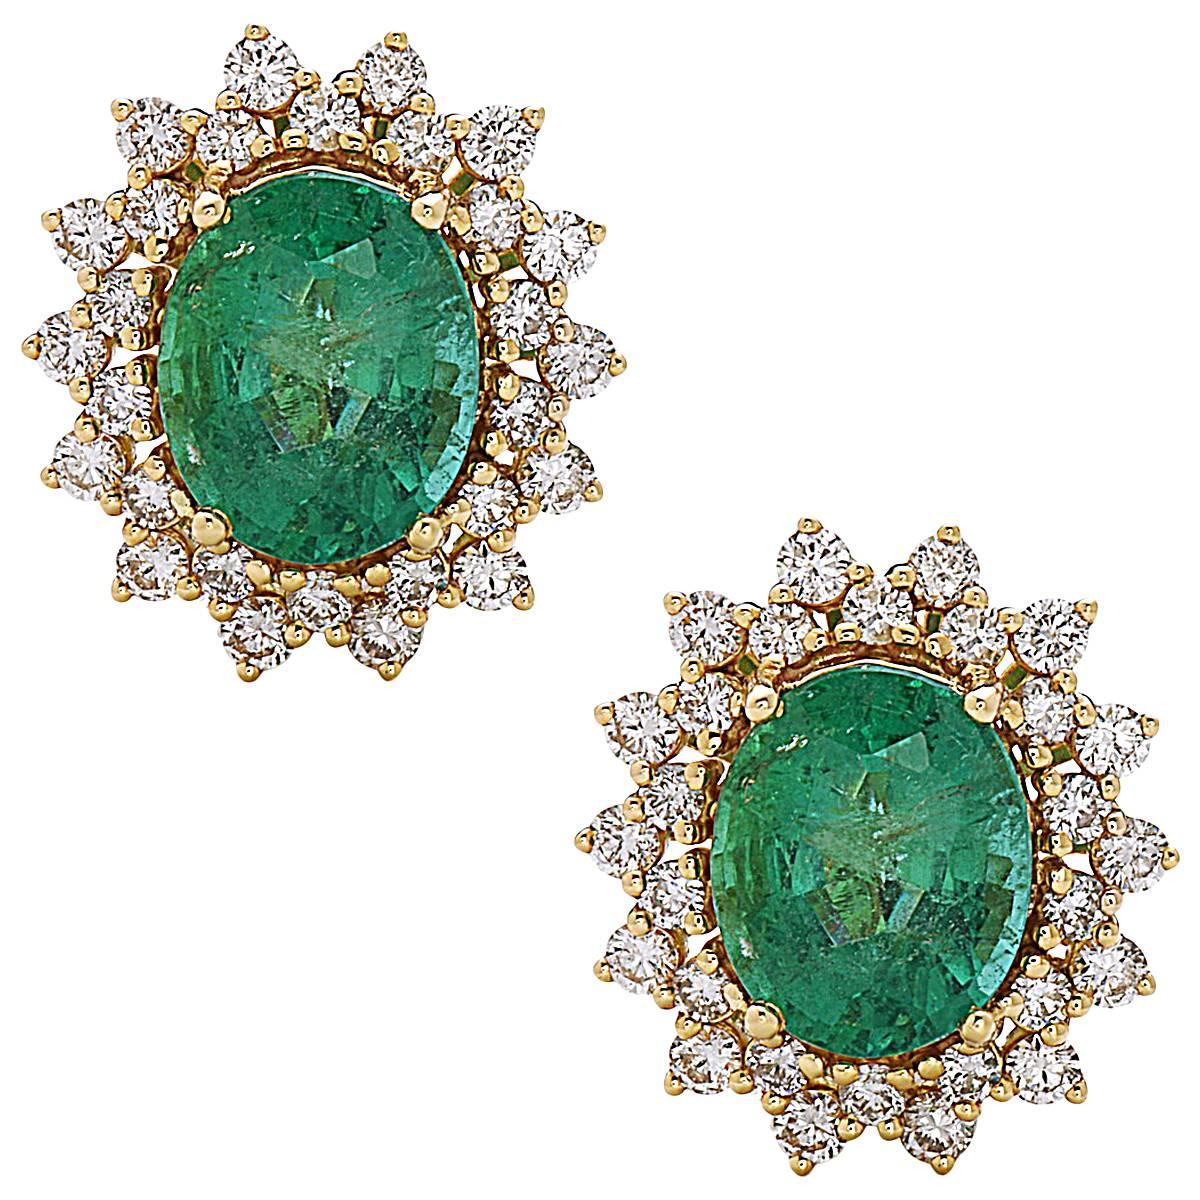 6.65ct Oval Shaped Zambian Emerald Stud Earrings With Diamonds Made In 18k Gold For Sale